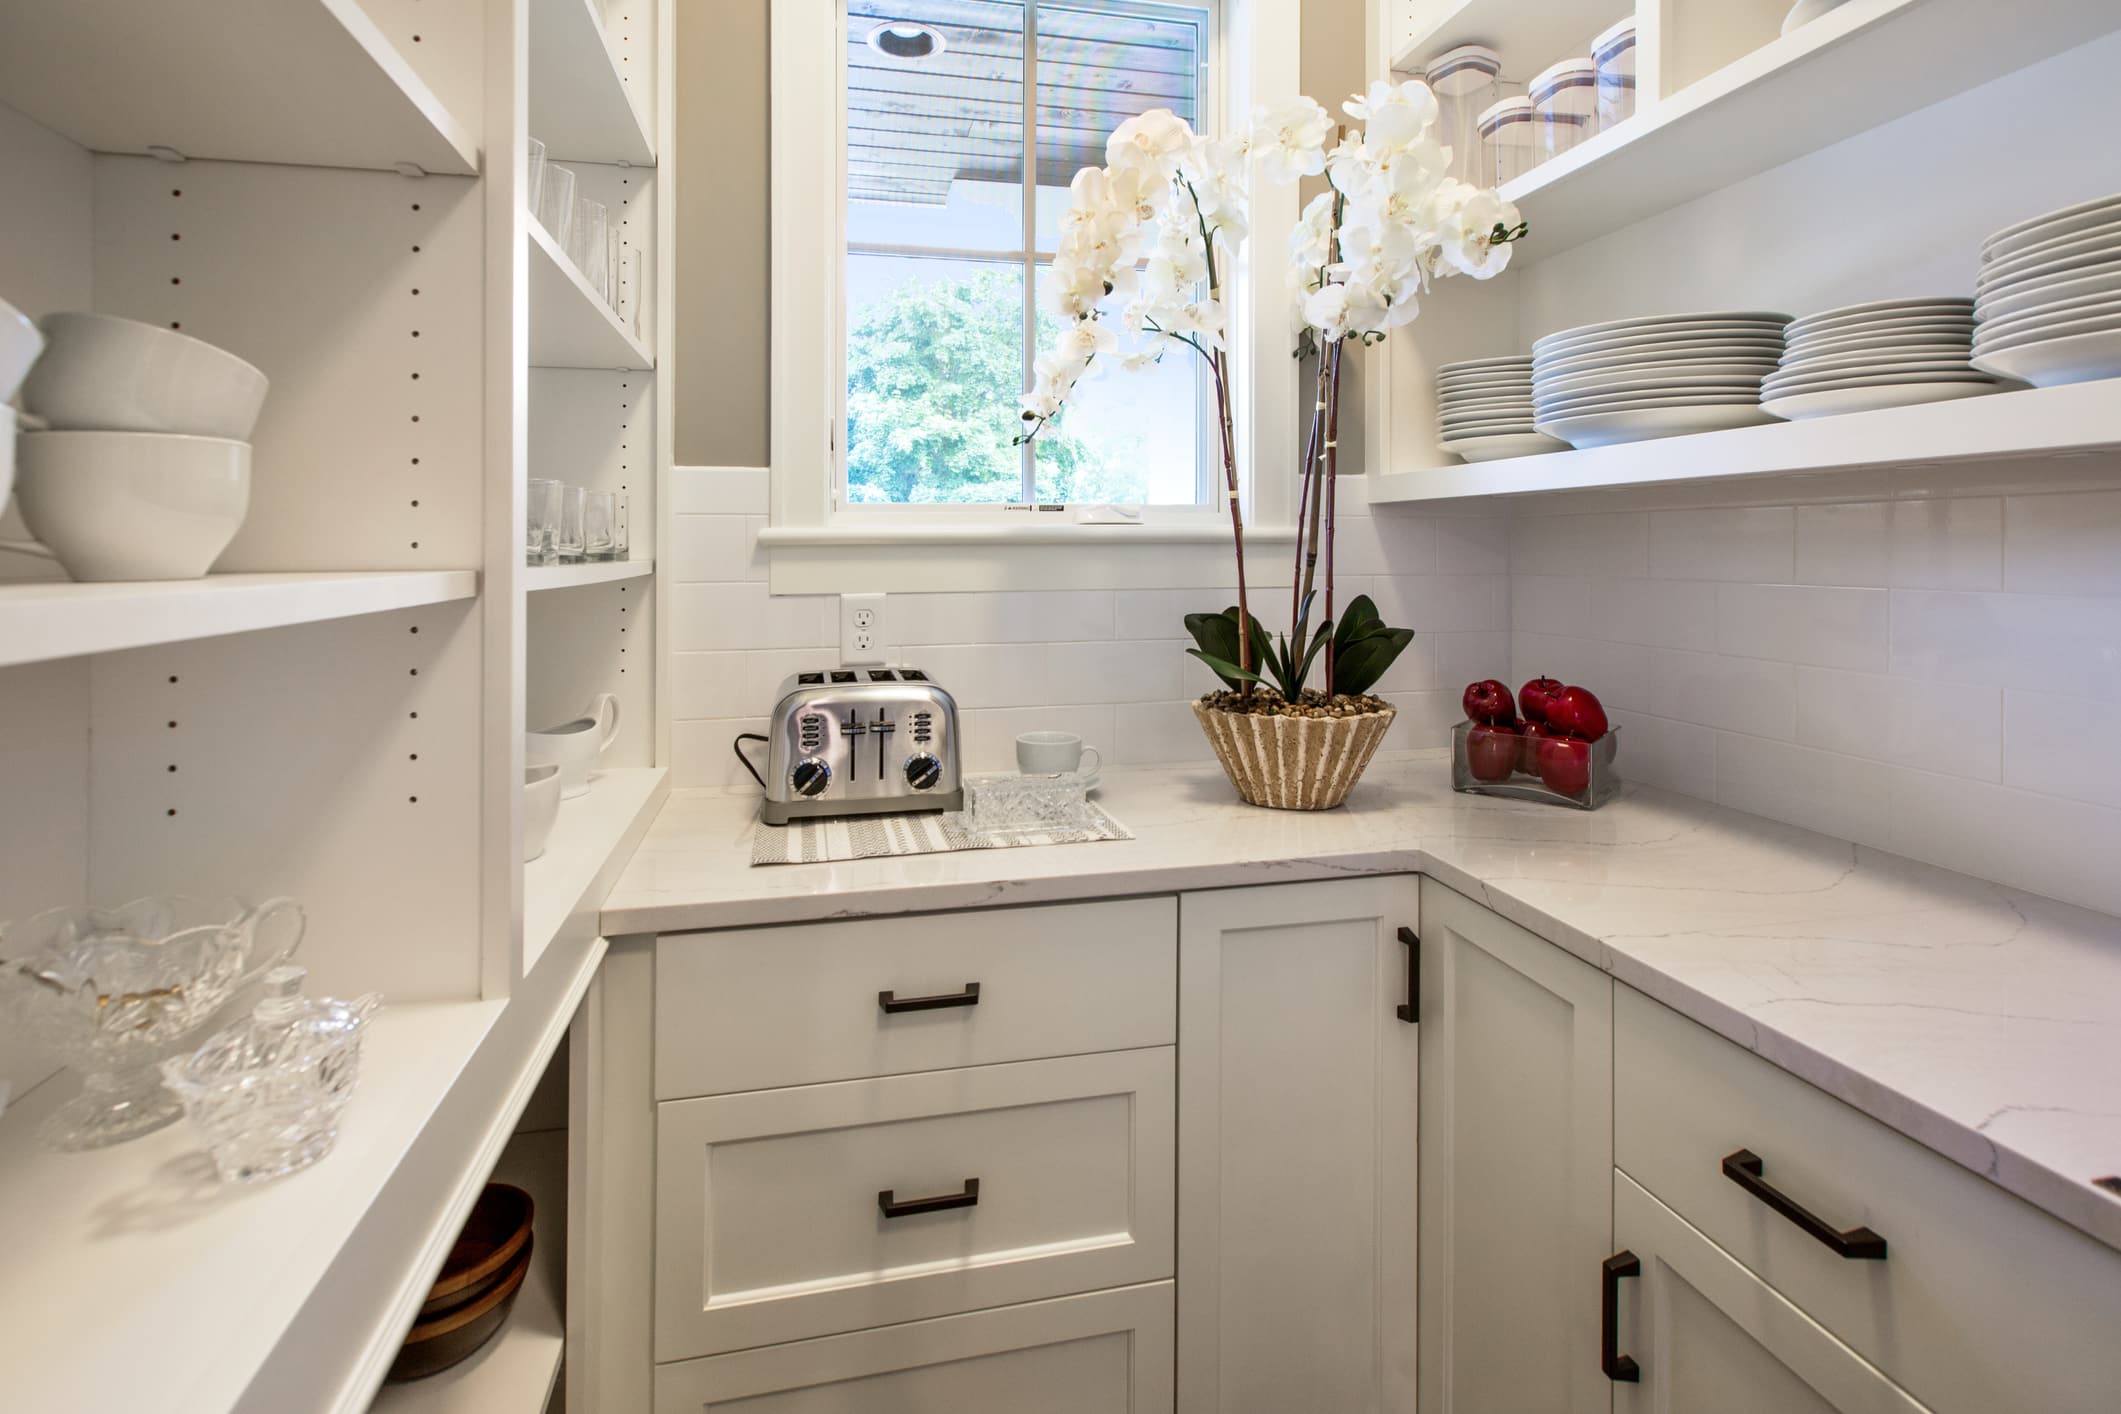 Kitchen Pantry Cabinets - a white cabinets and shelves with white plates and bowls